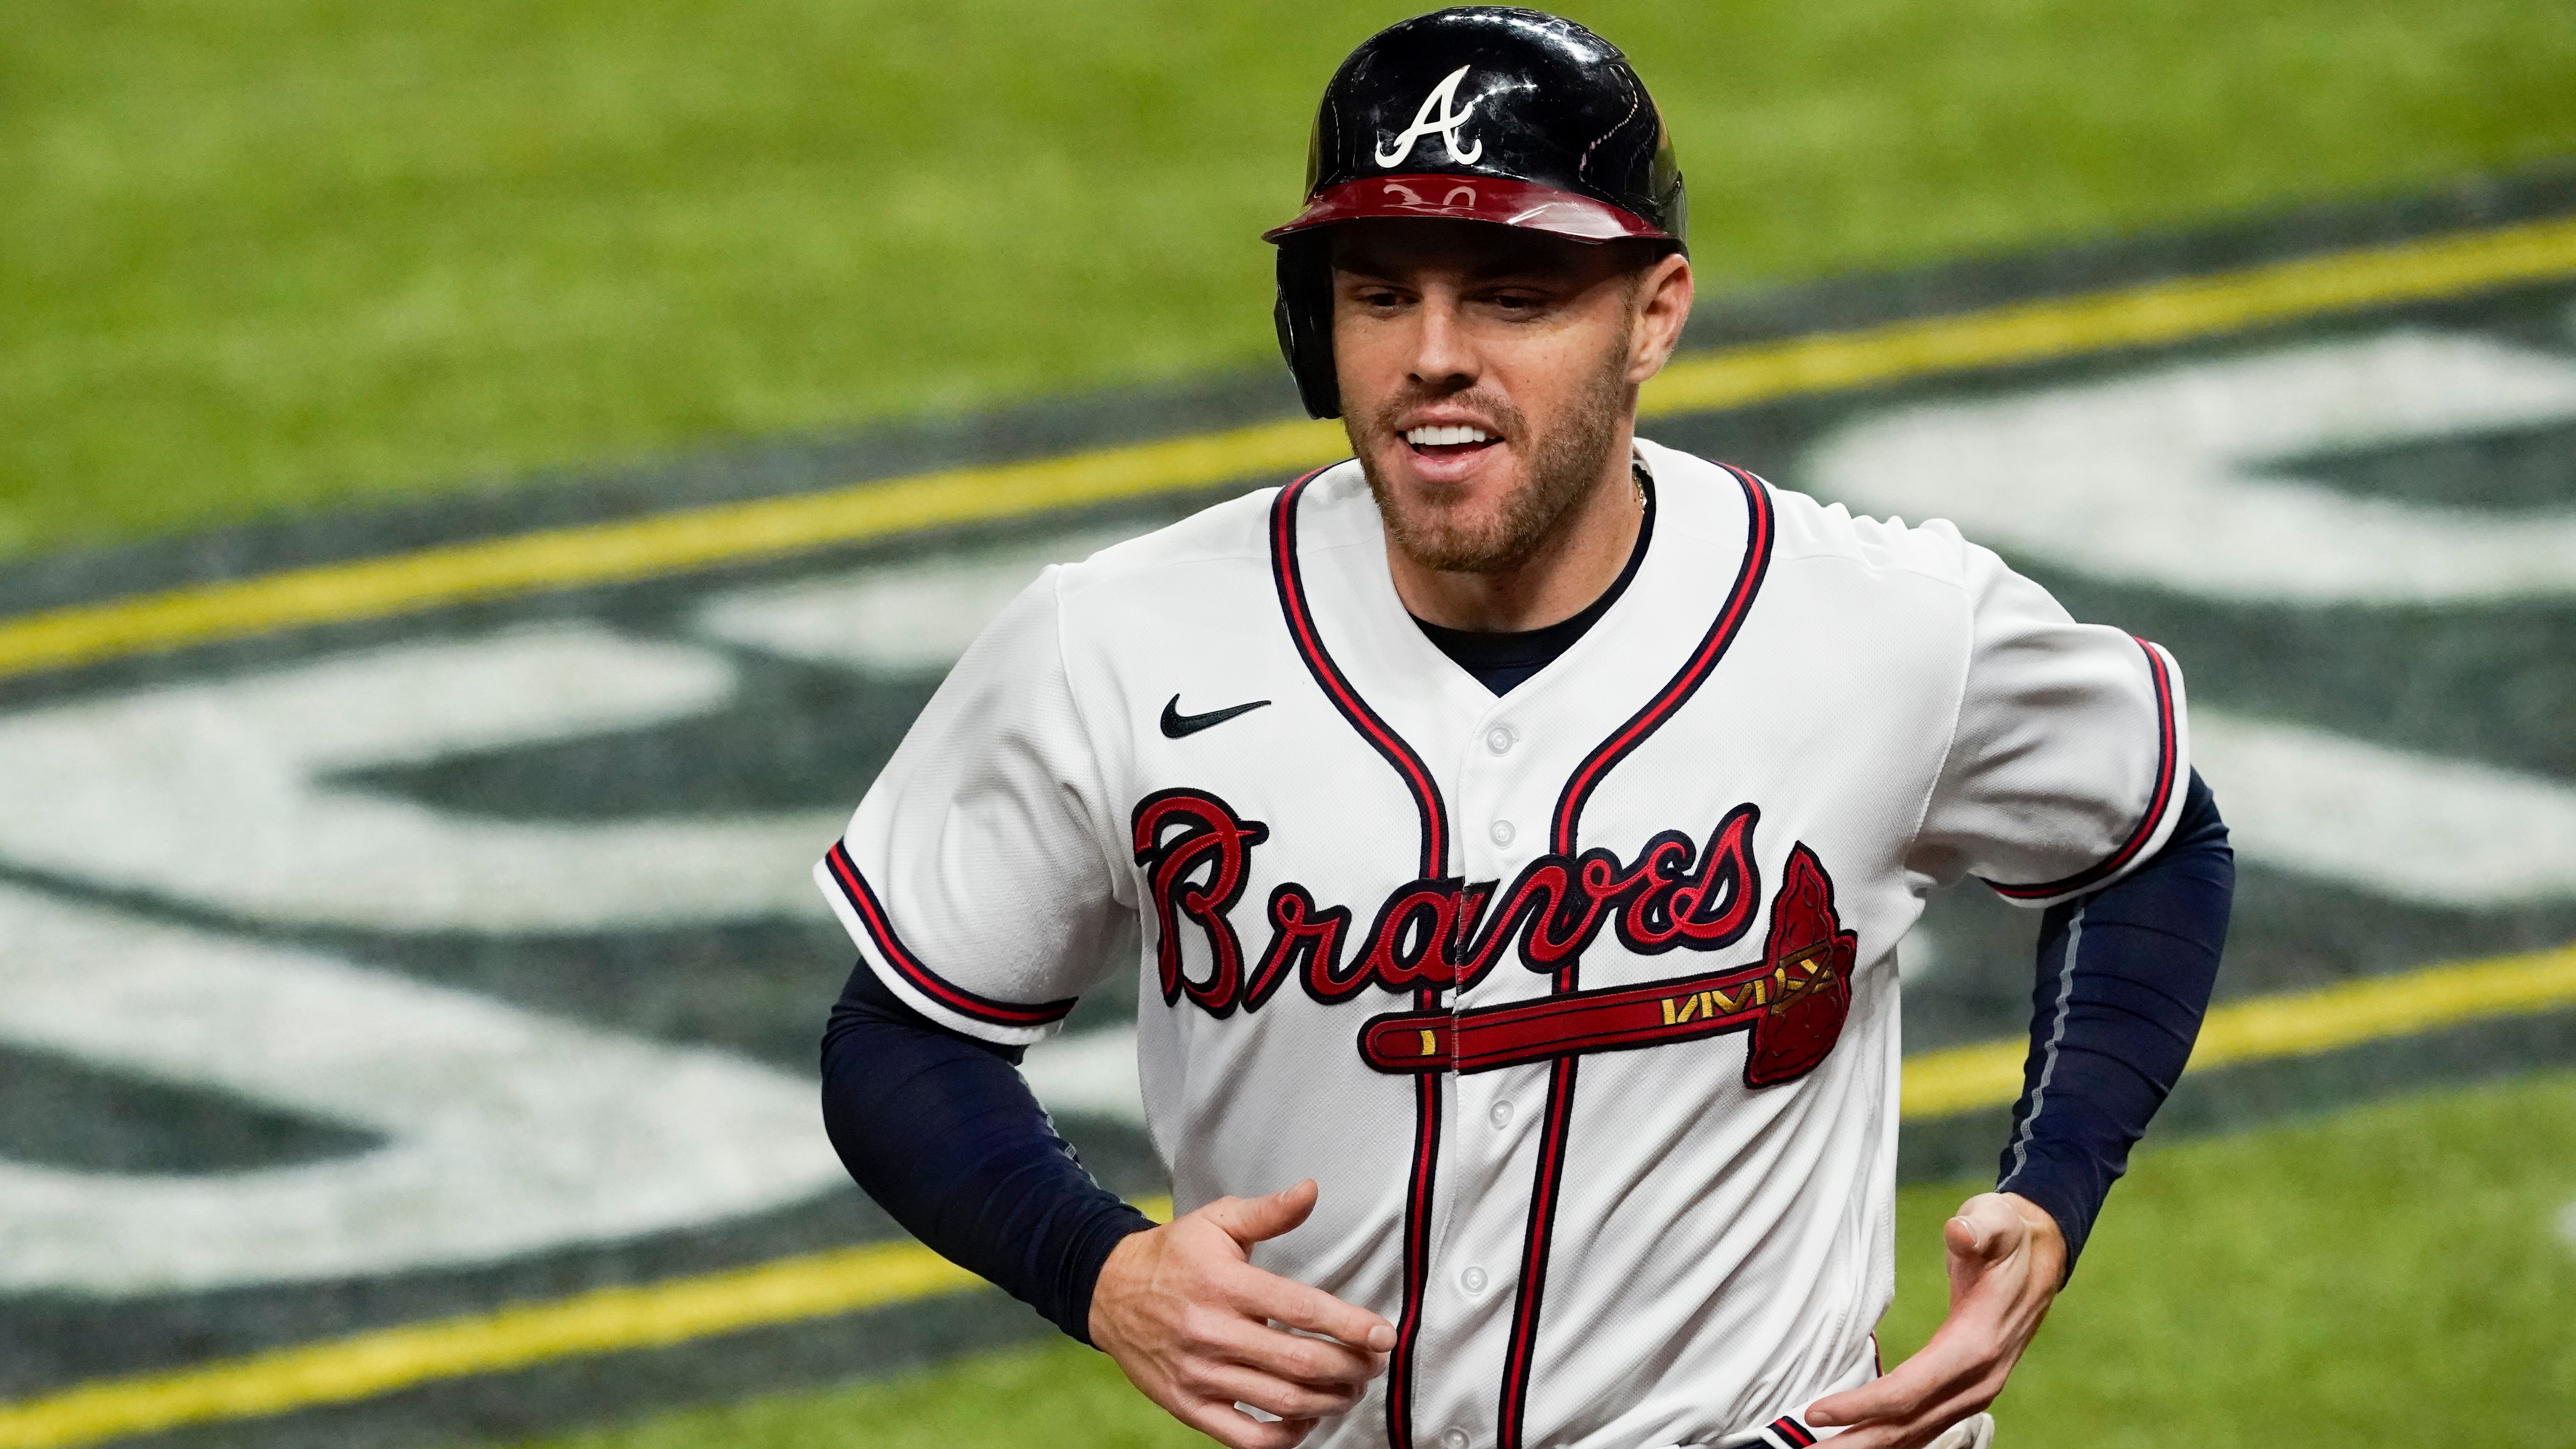 Freddie Freeman with the Rays? If you're going to dream, then